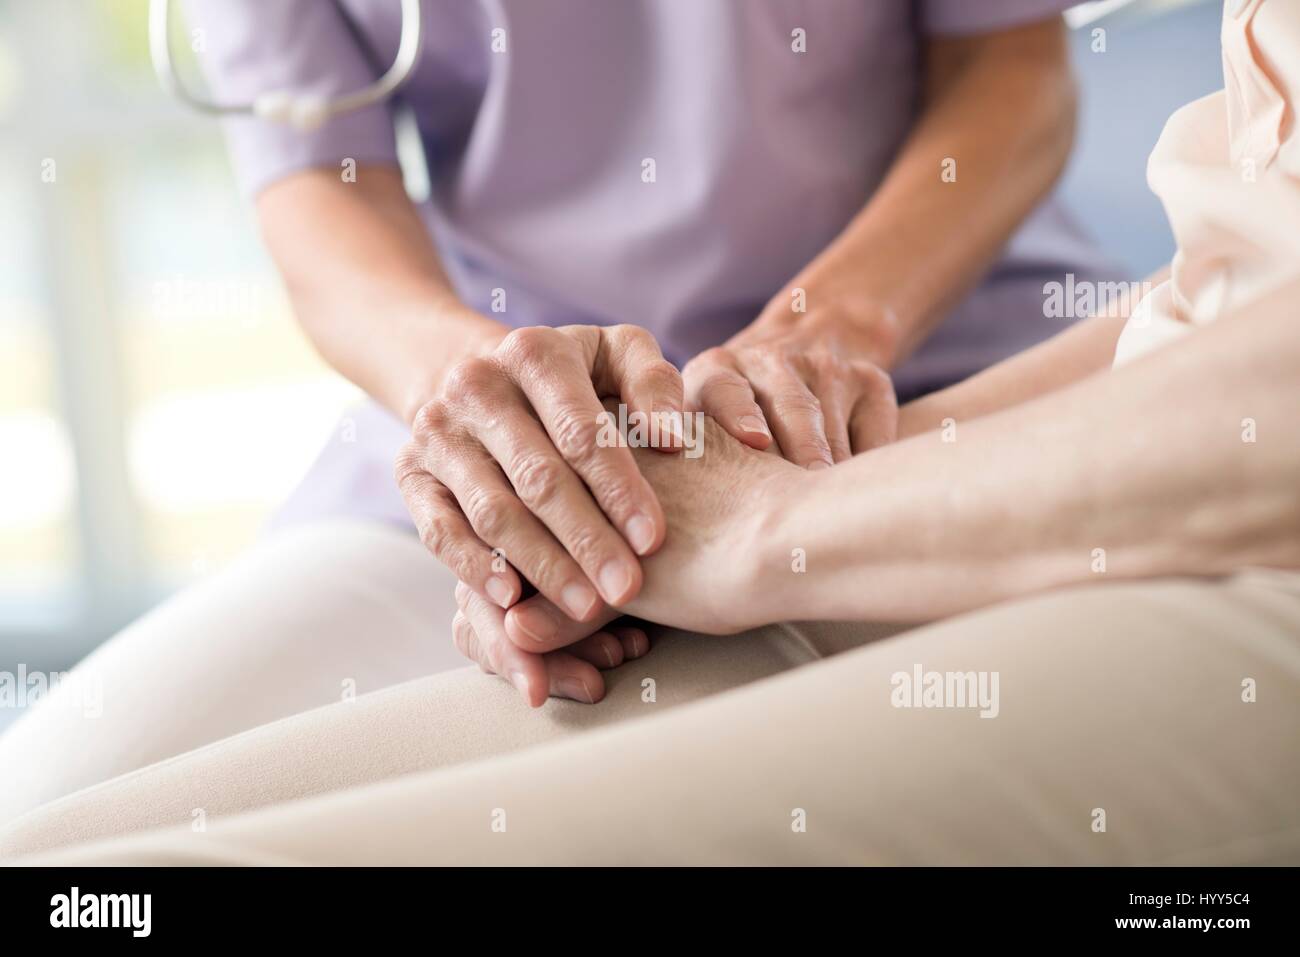 Care worker holding senior woman's hands. Banque D'Images